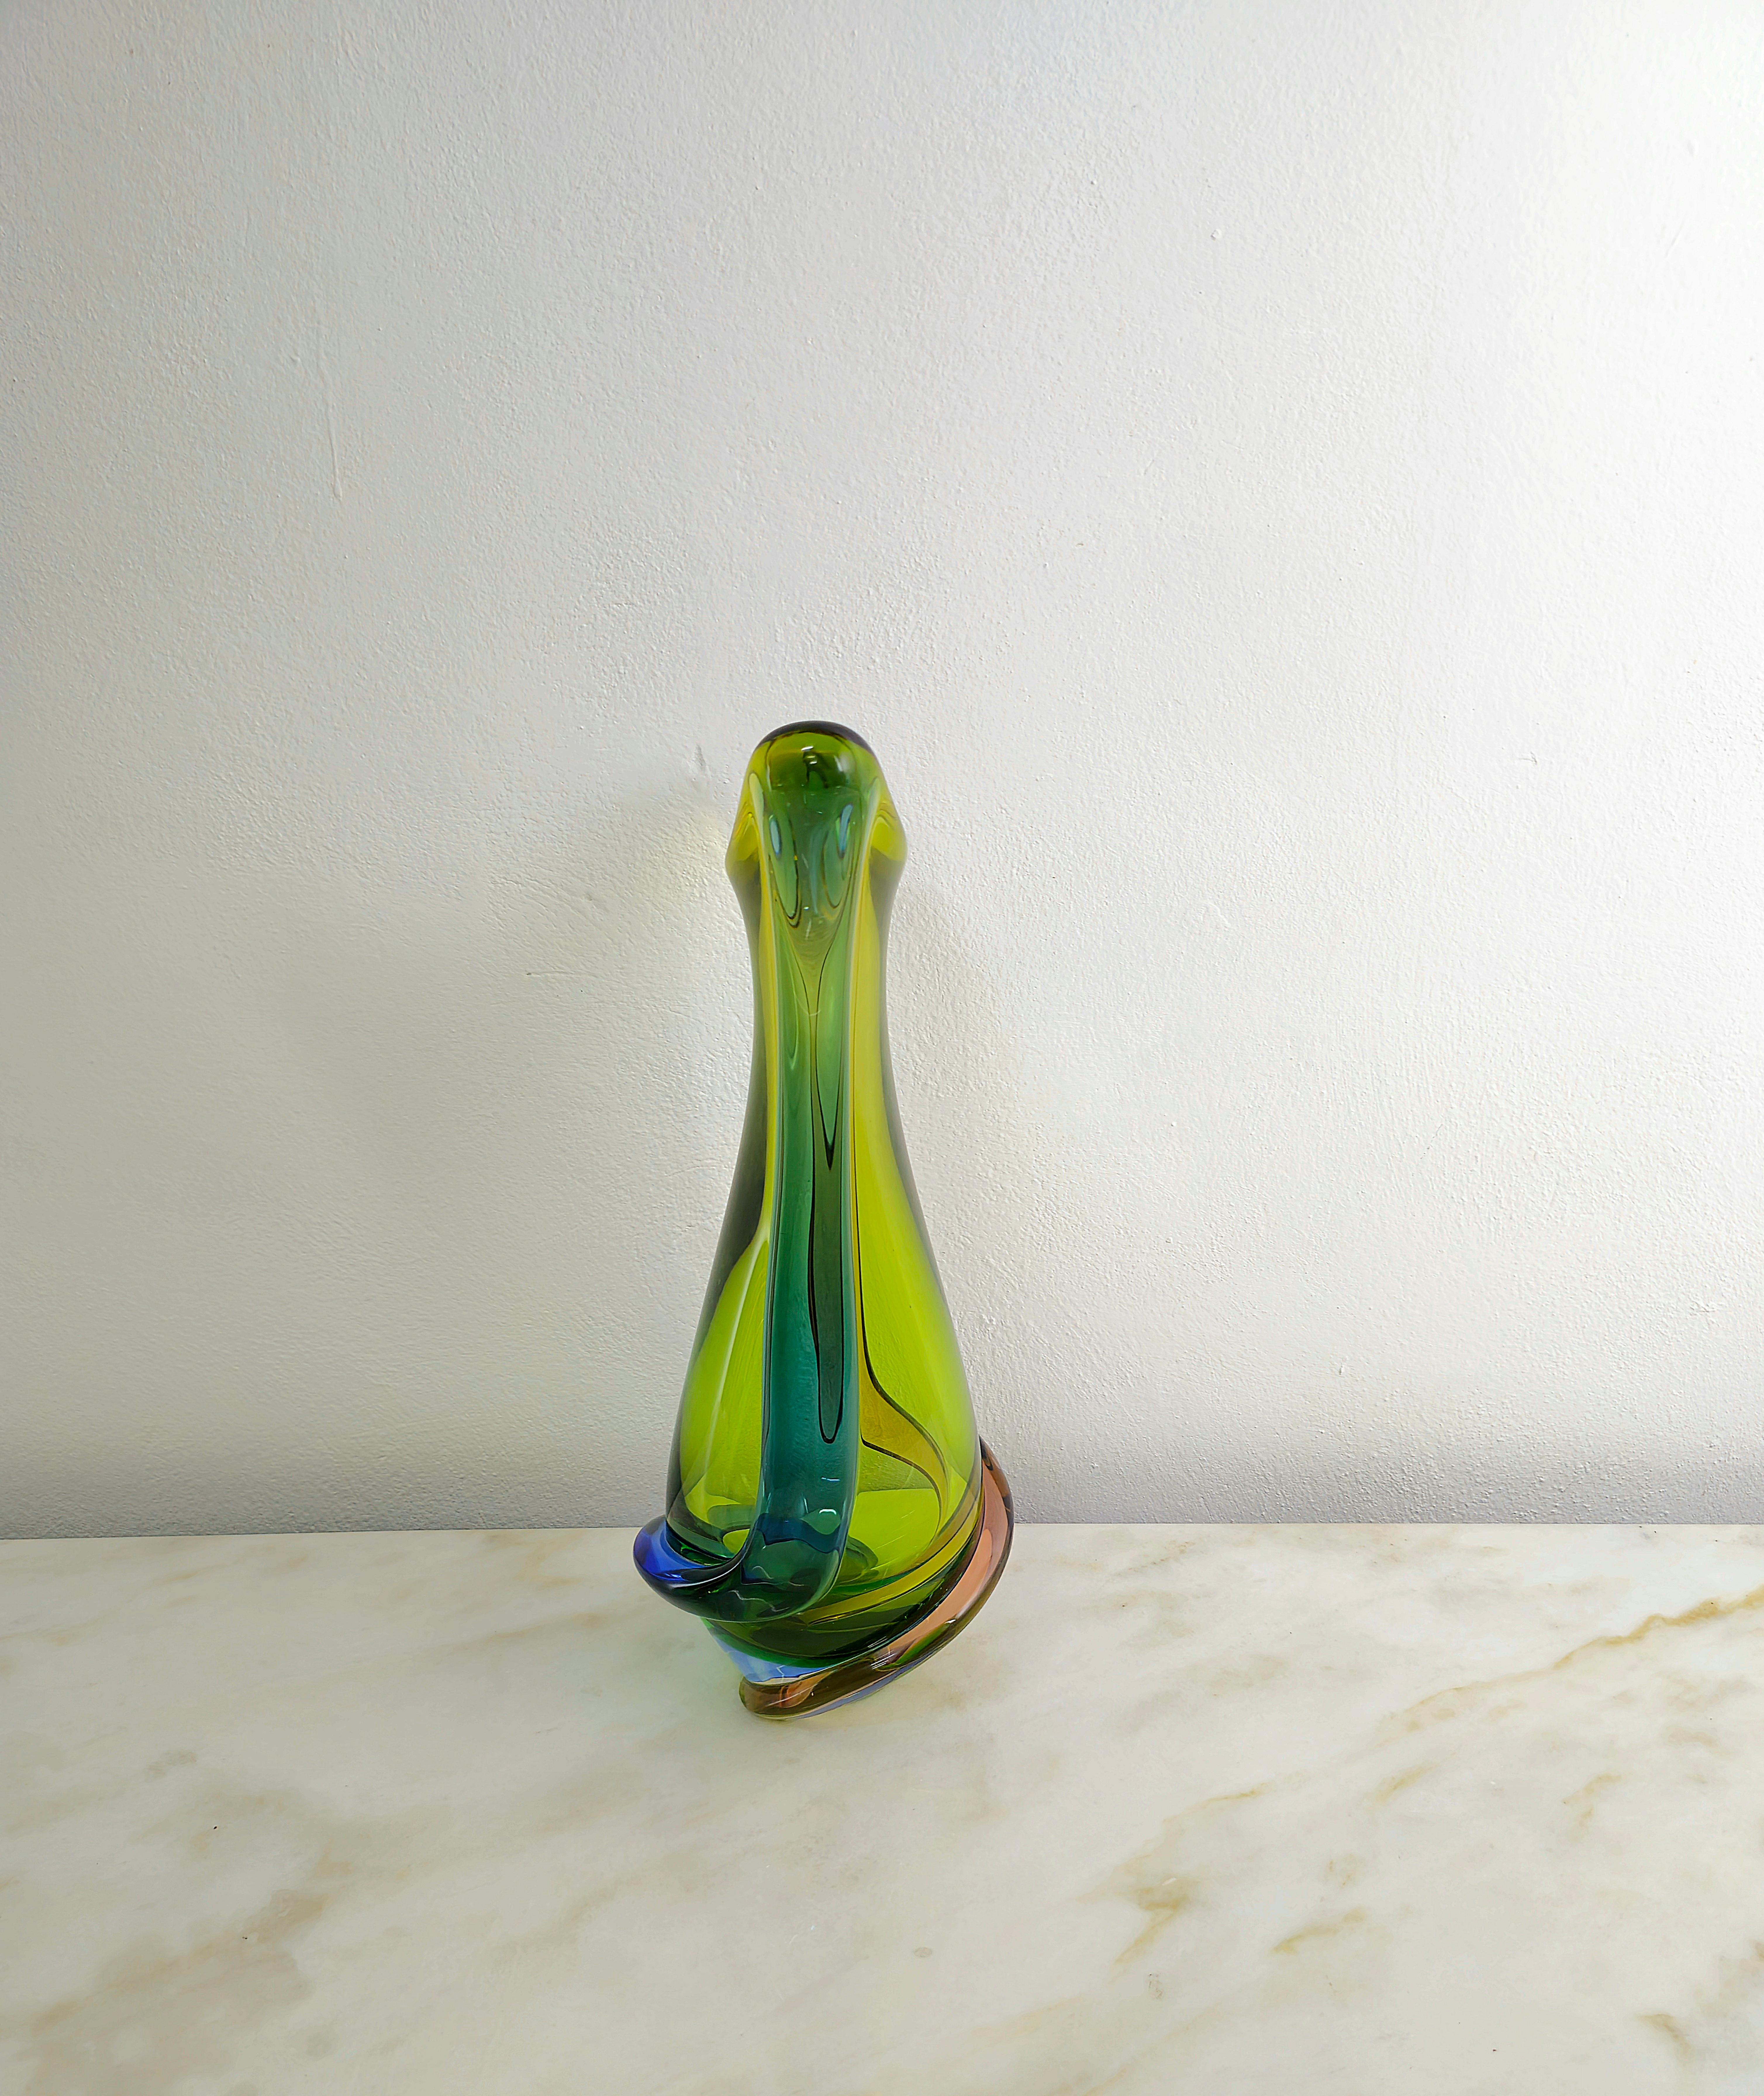 Vase Decorative Object Murano Glass Attributed to Flavio Poli Midcentury 1970s For Sale 5